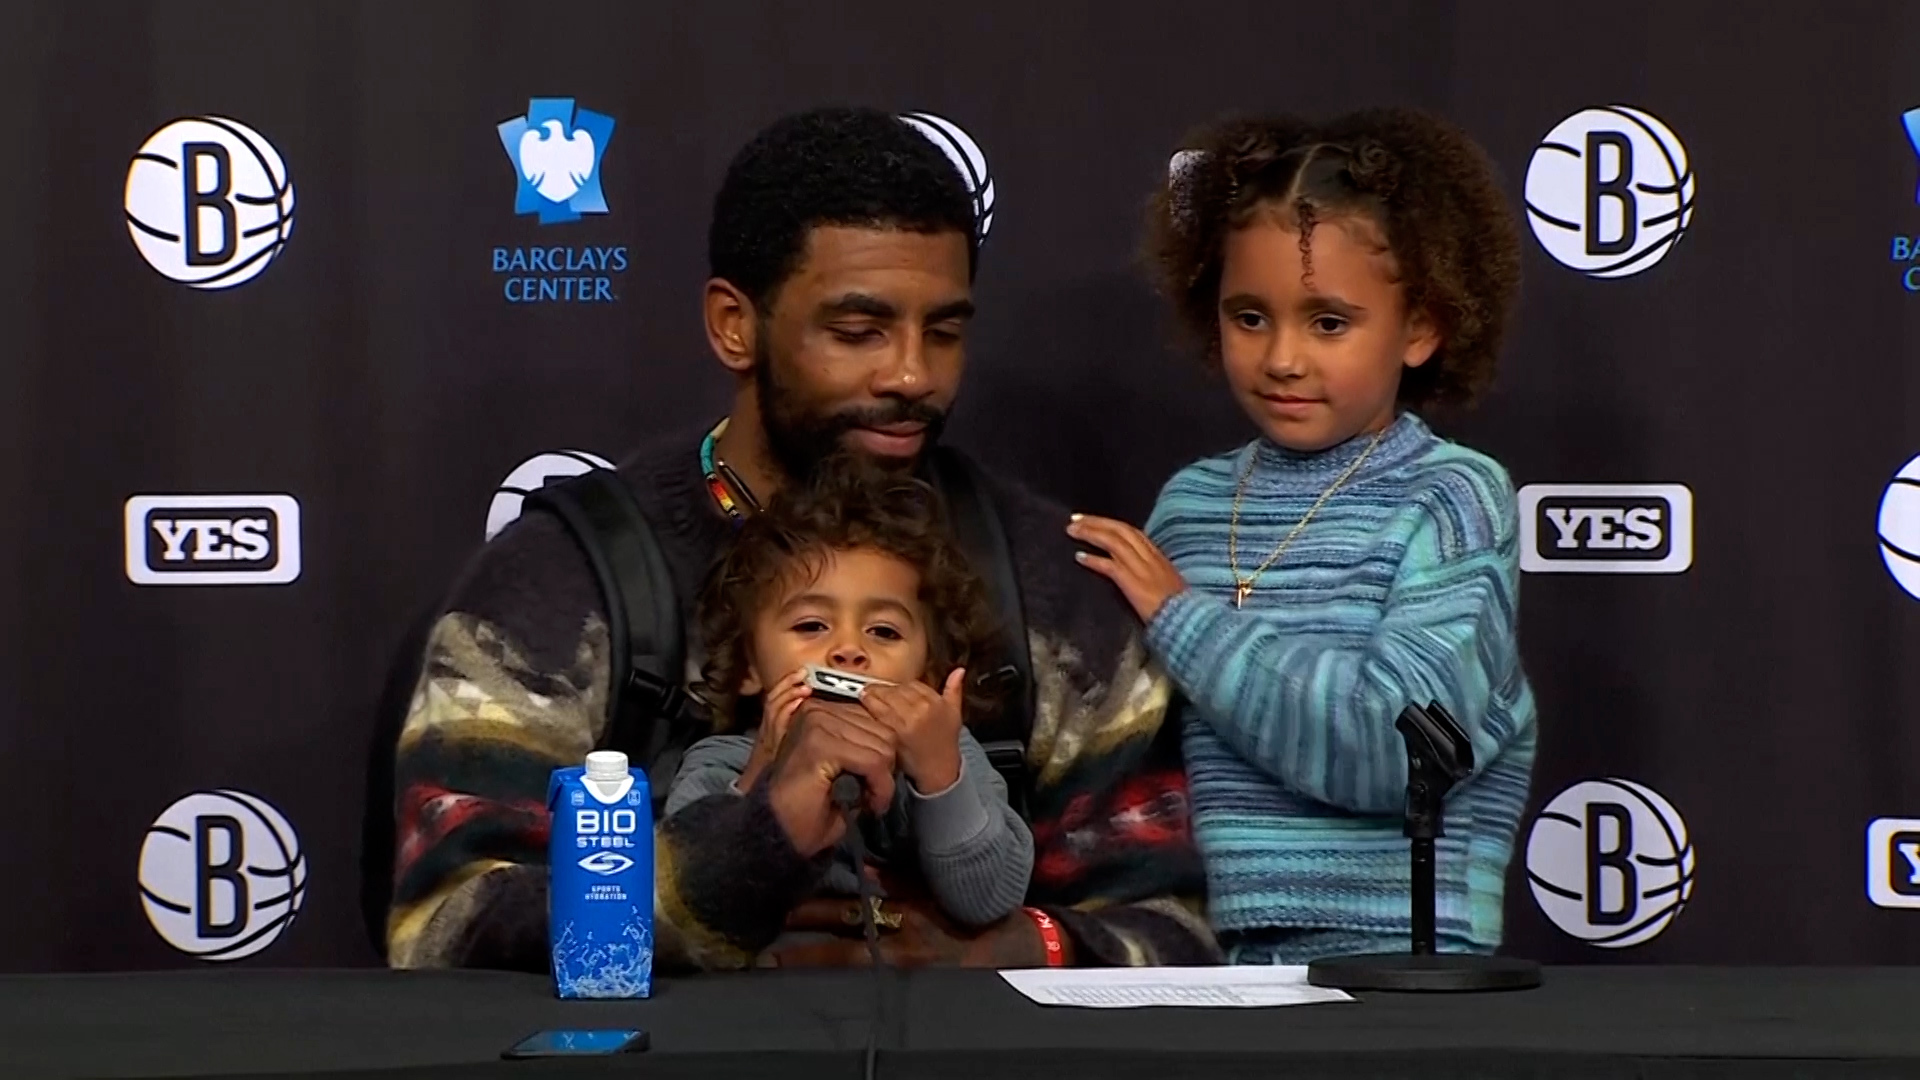 Nets star Kyrie Irving's son hilariously interrupts postgame press conference